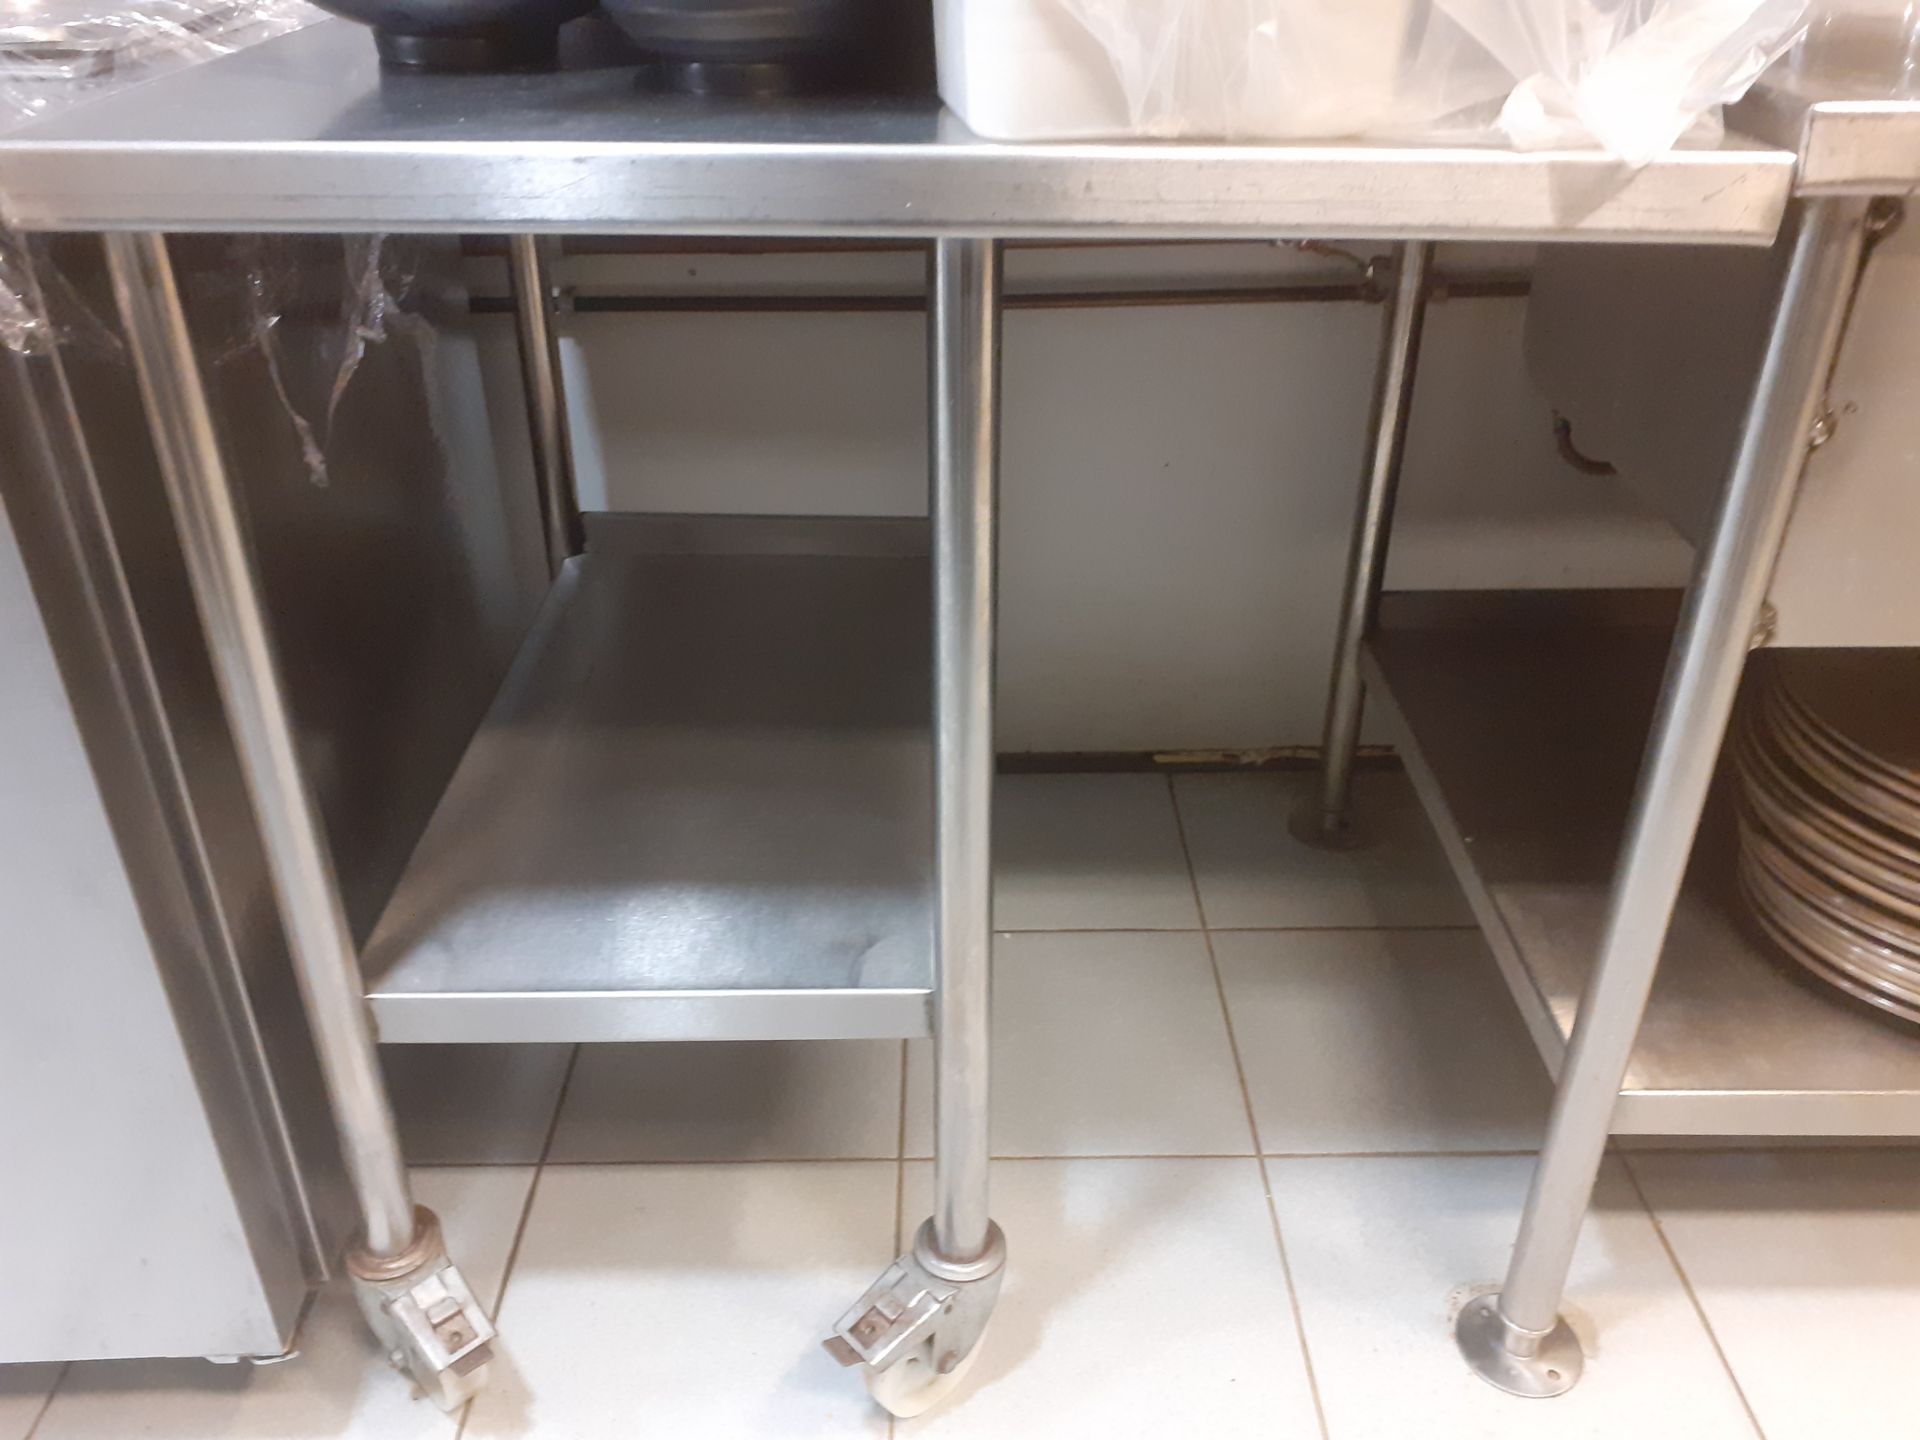 1 x Stainless Steel Prep Table With Undercounter and Castors - CL582 - Location: London EC4V - Image 2 of 4